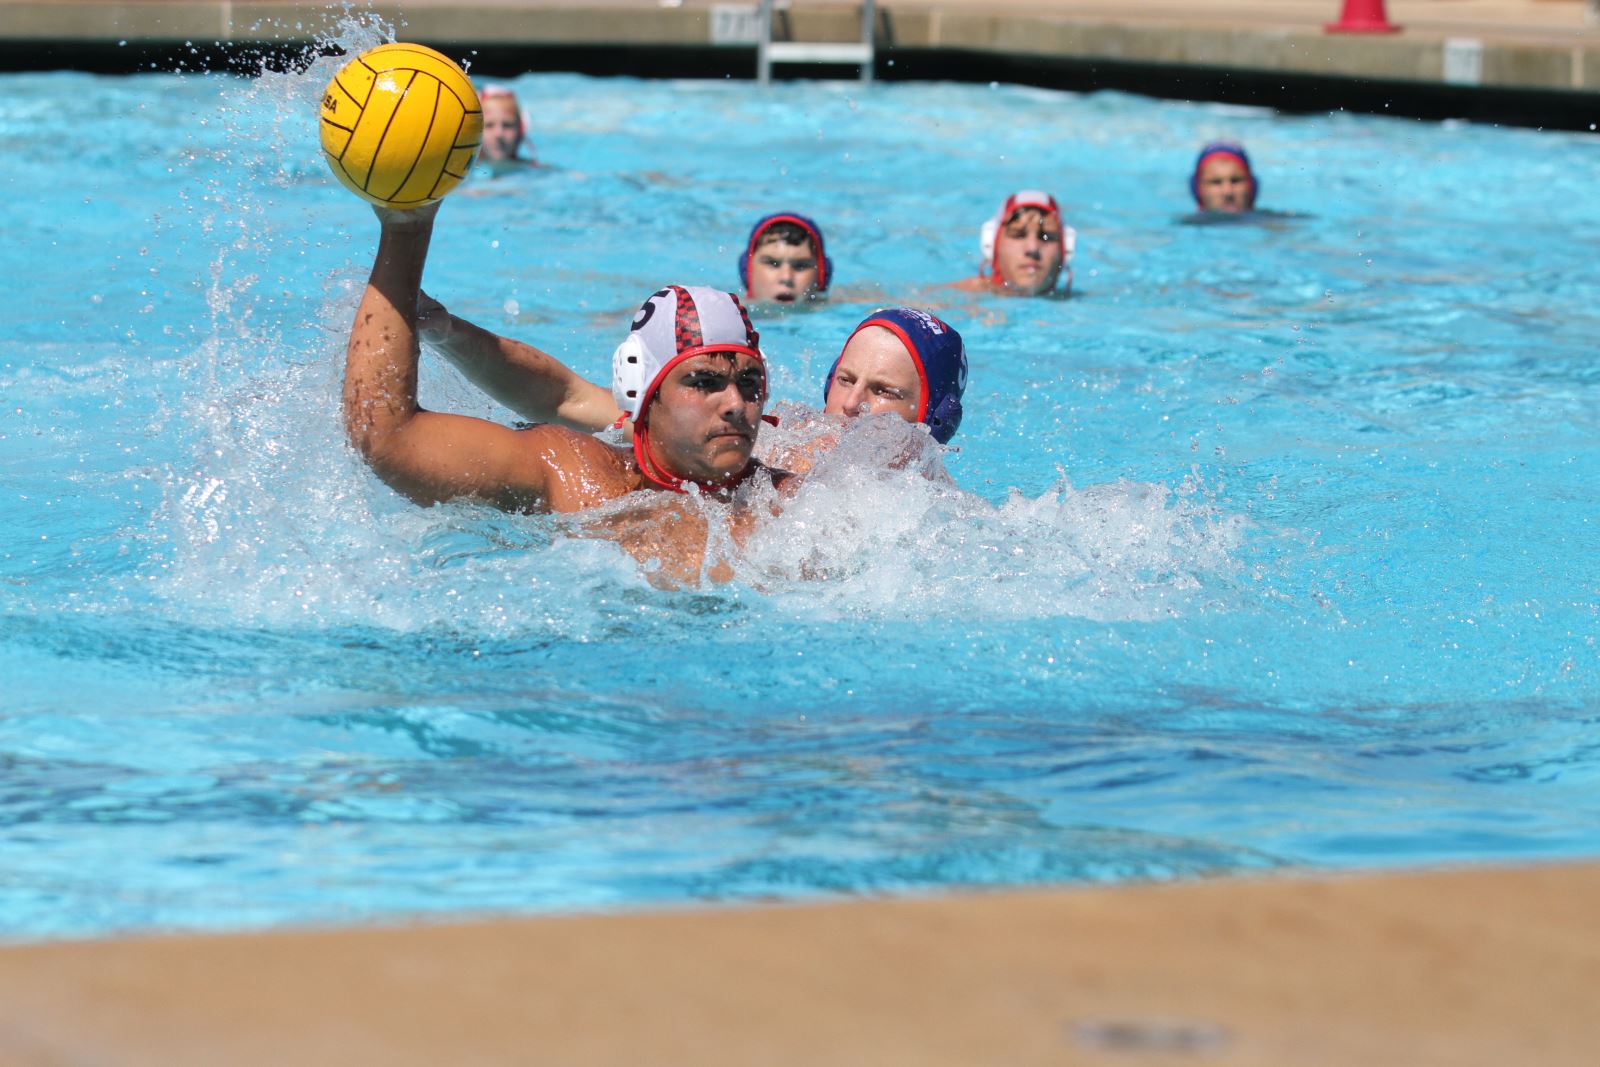 boys in a water polo match